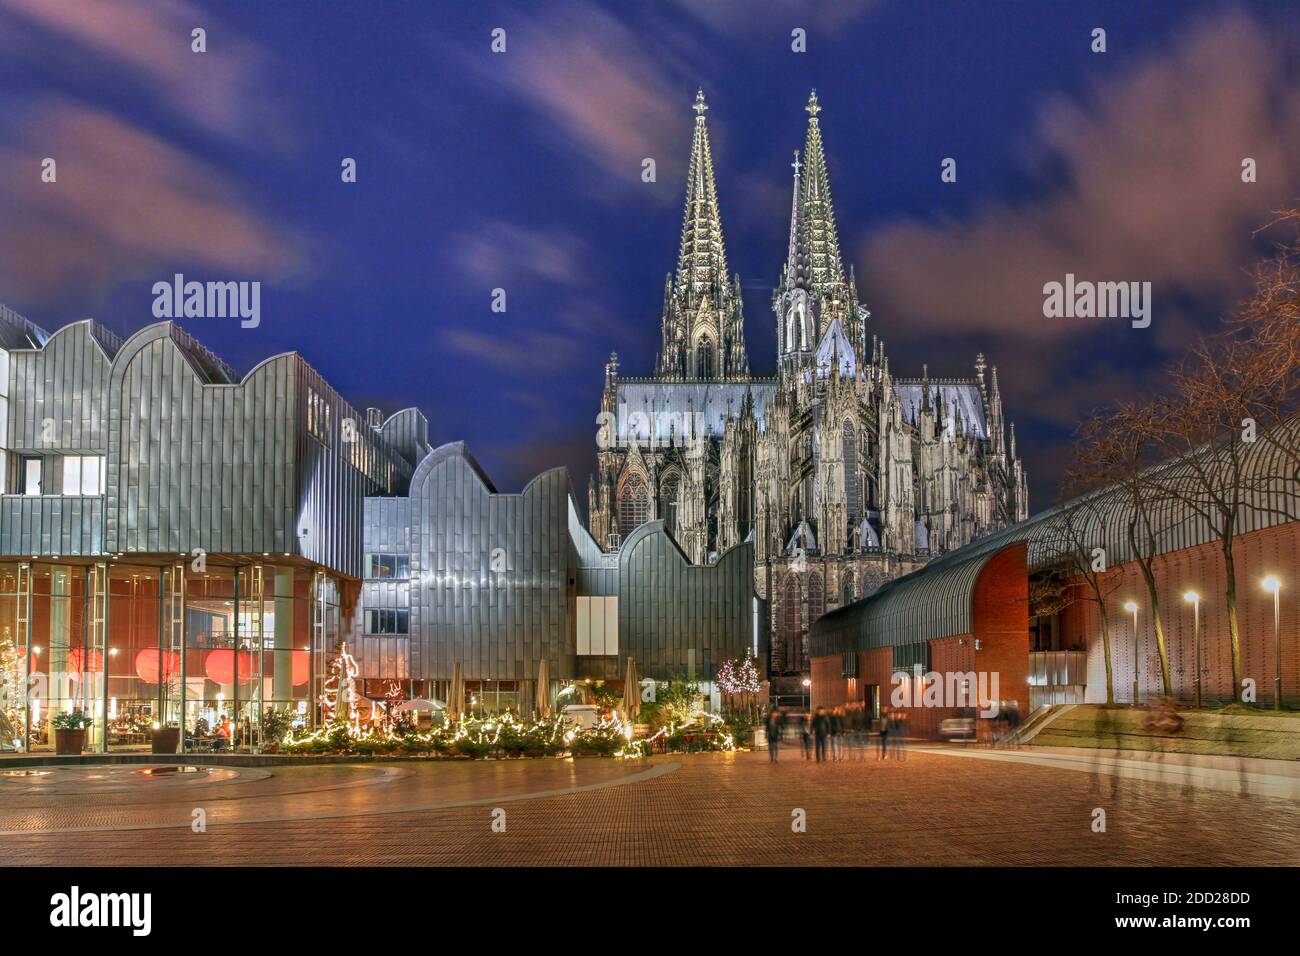 Night scene of Heinrich-Boell square in Cologne, Germany with the Cologne Philarmonie Hall and the Ludwig Museum, overlooked by the majestic Cologne C Stock Photo